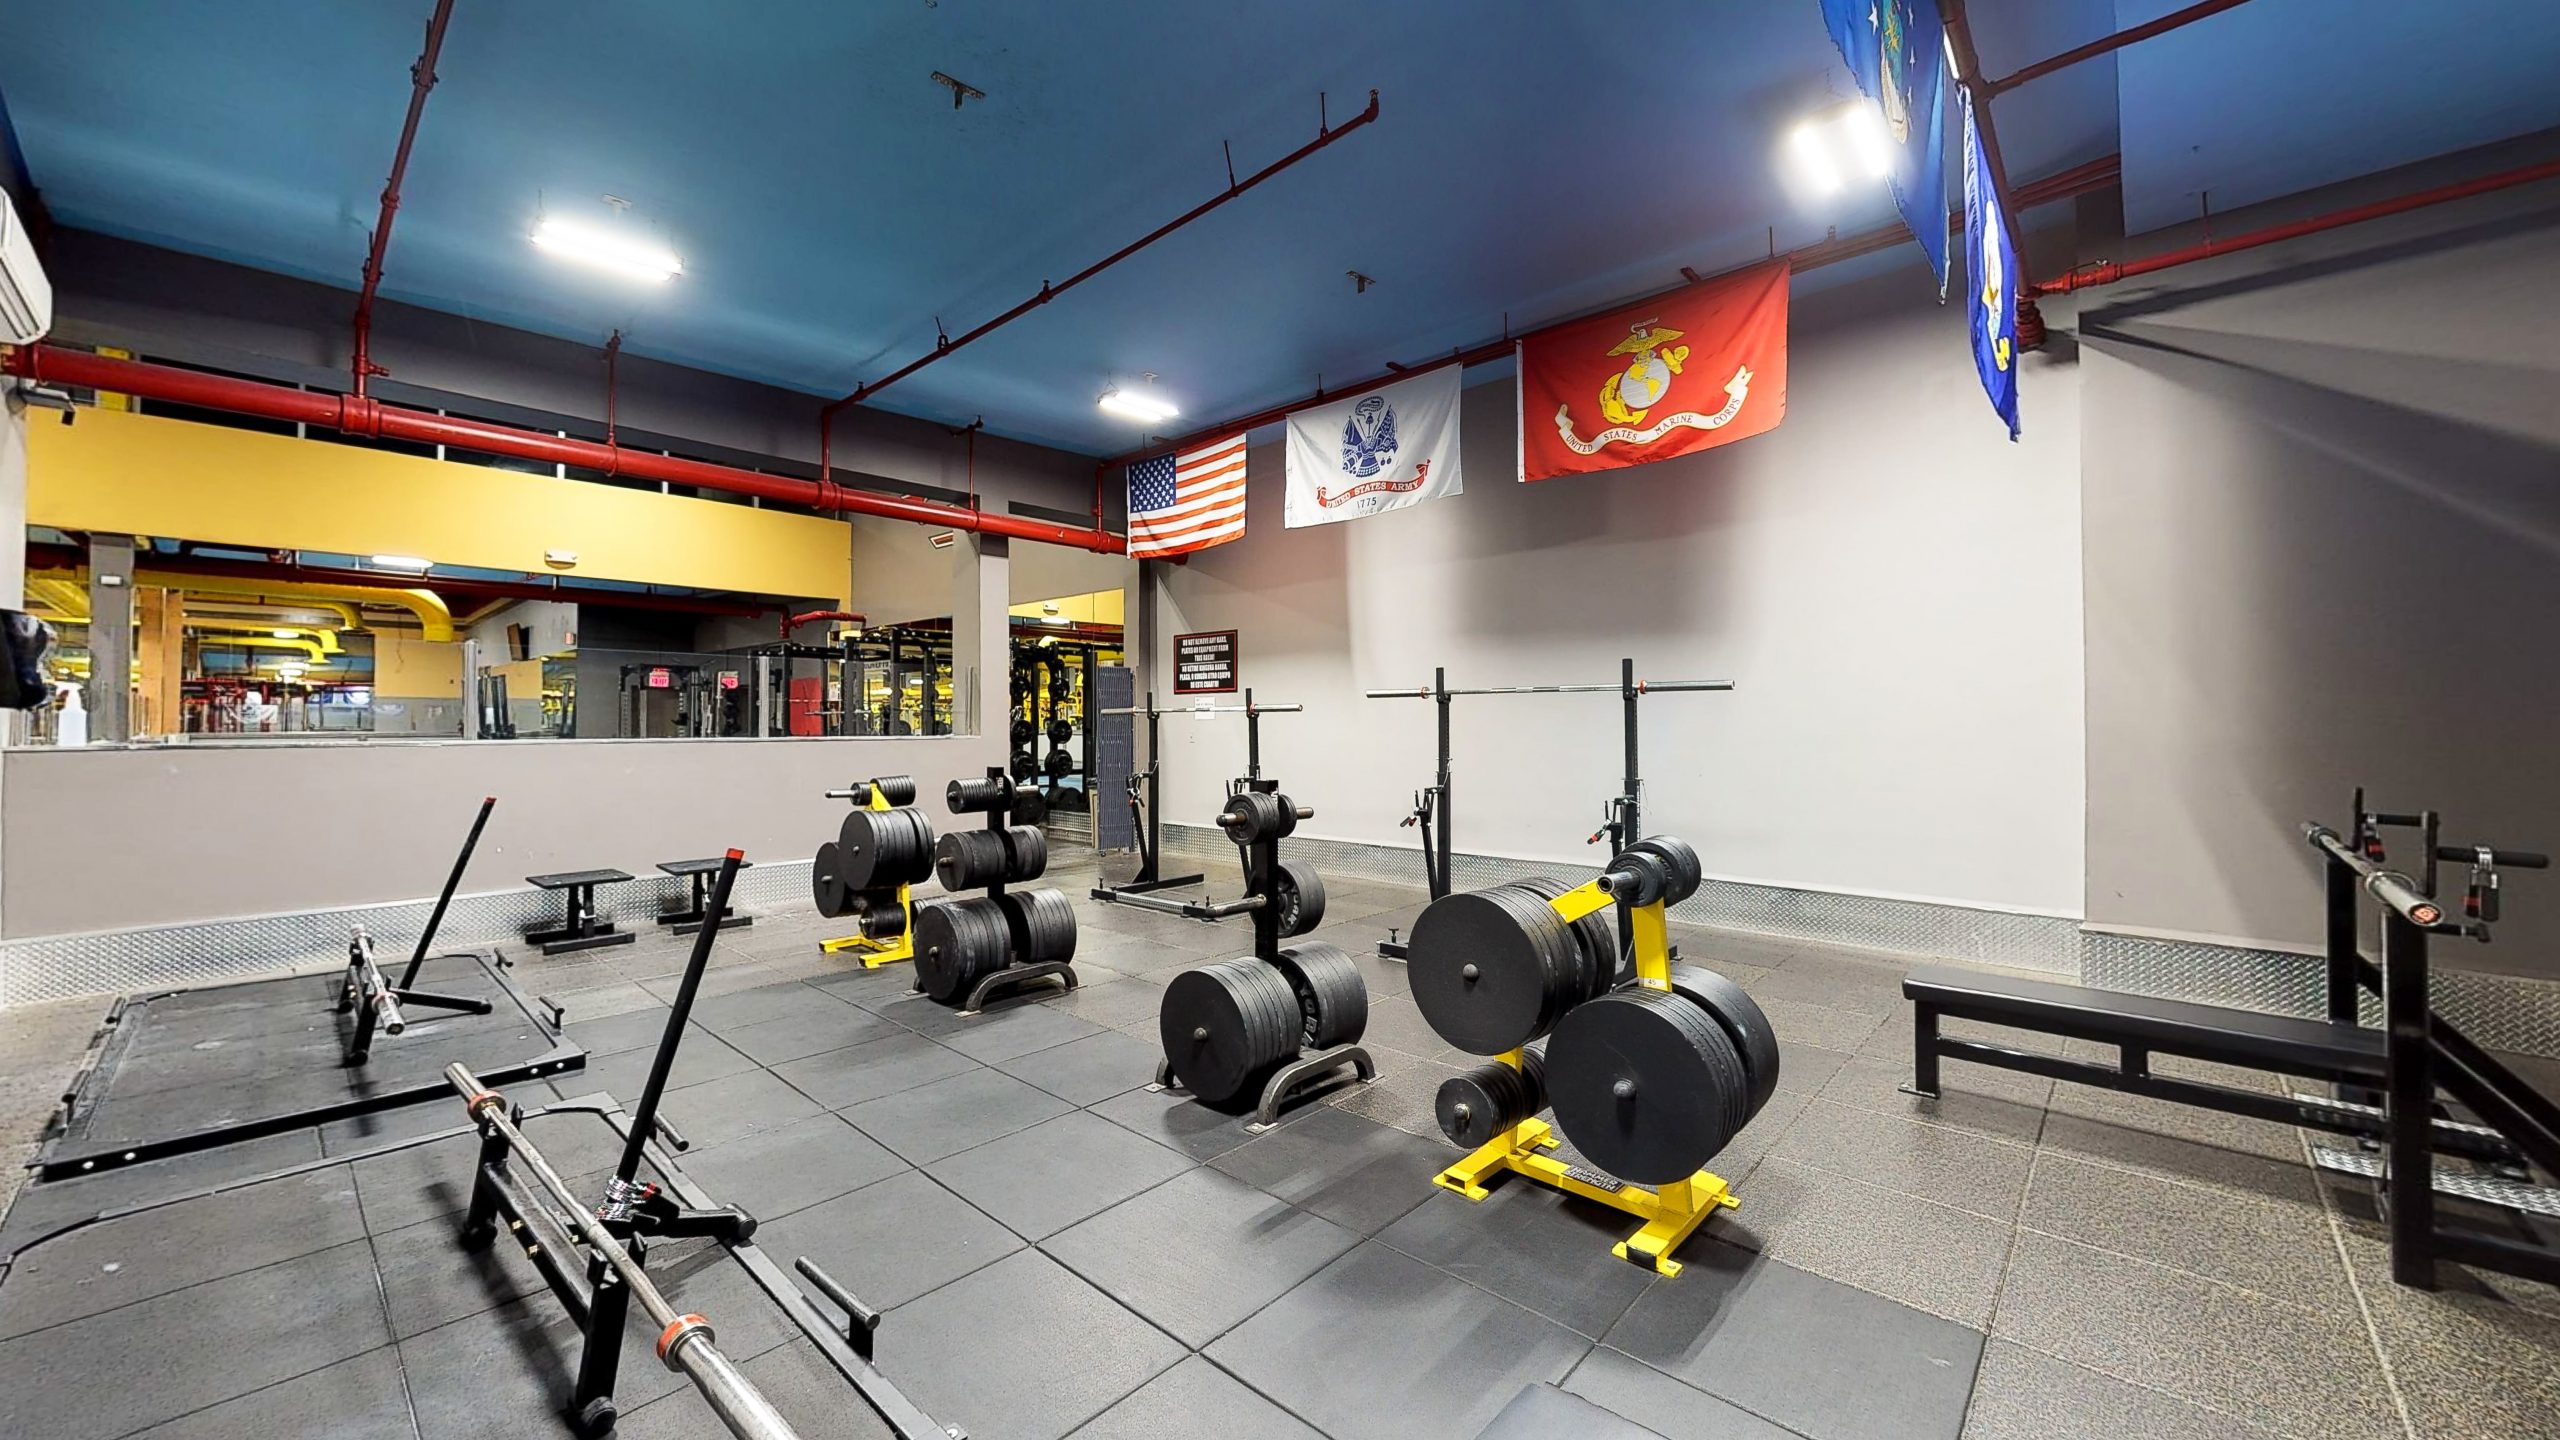 Gallery - Signature Fitness – Signature Fitness Belleville, New Jersey